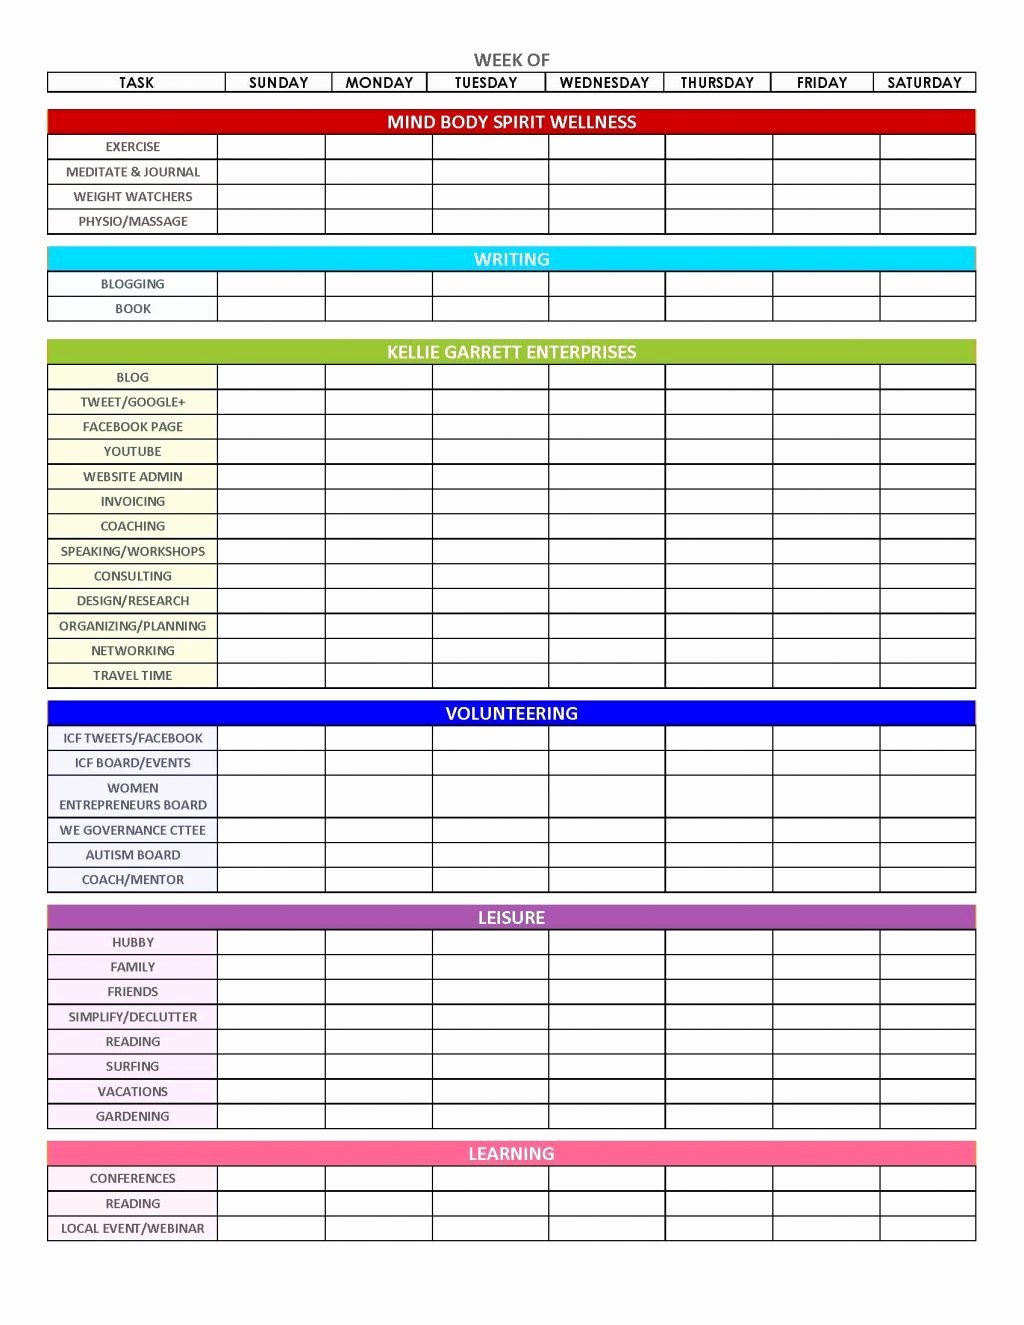 Time Tracking Excel Template Beautiful Sheet Daily Time Tracking Spreadsheet Excel Template